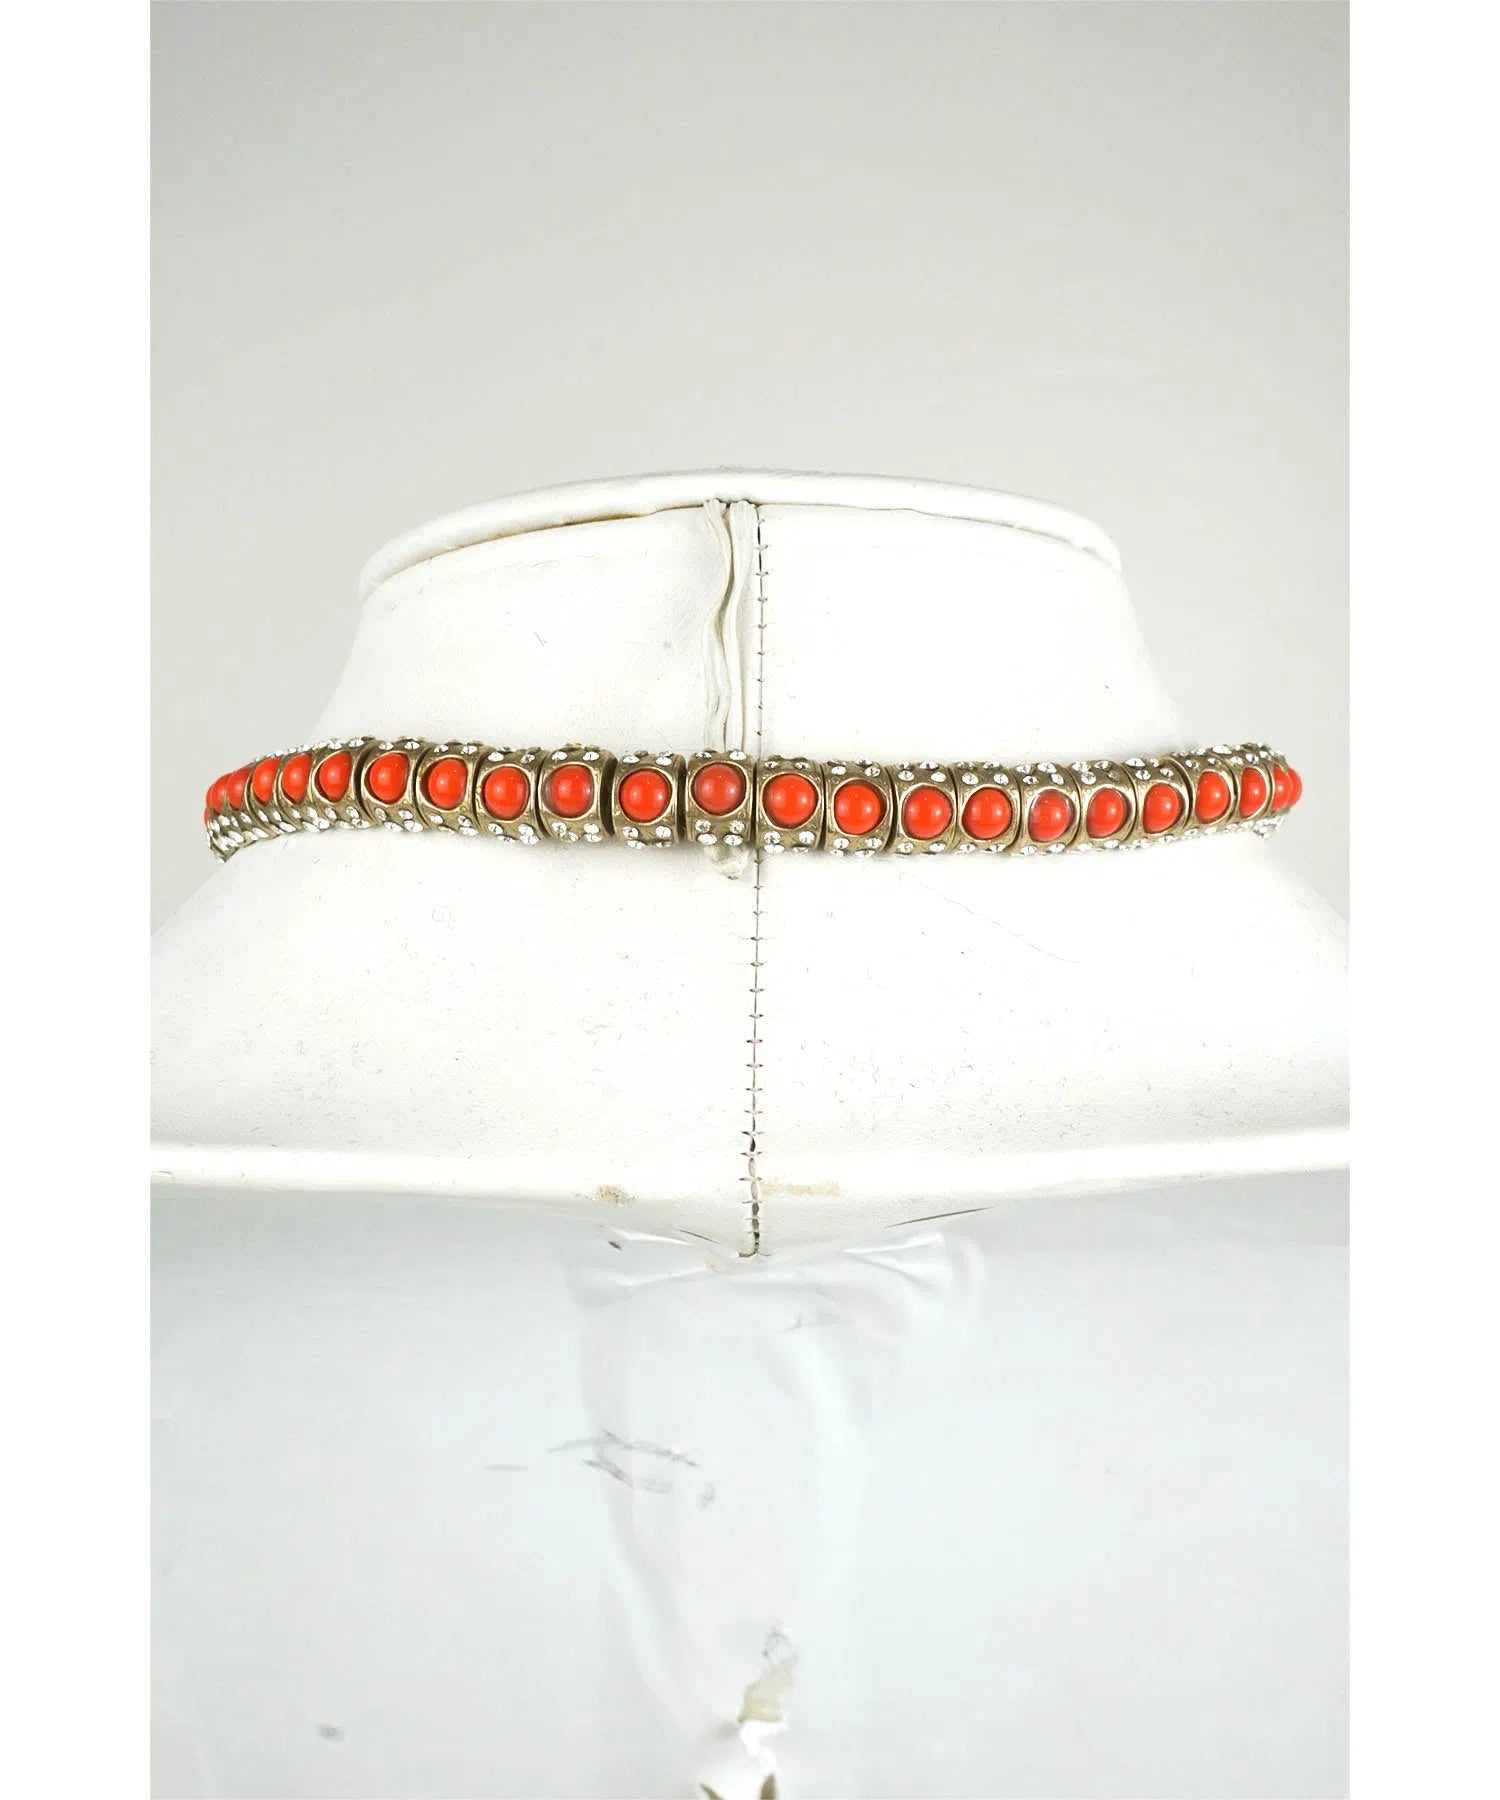 Chanel Resin & Strass Snake Choker Necklace 2008 - Foxy Couture Carmel